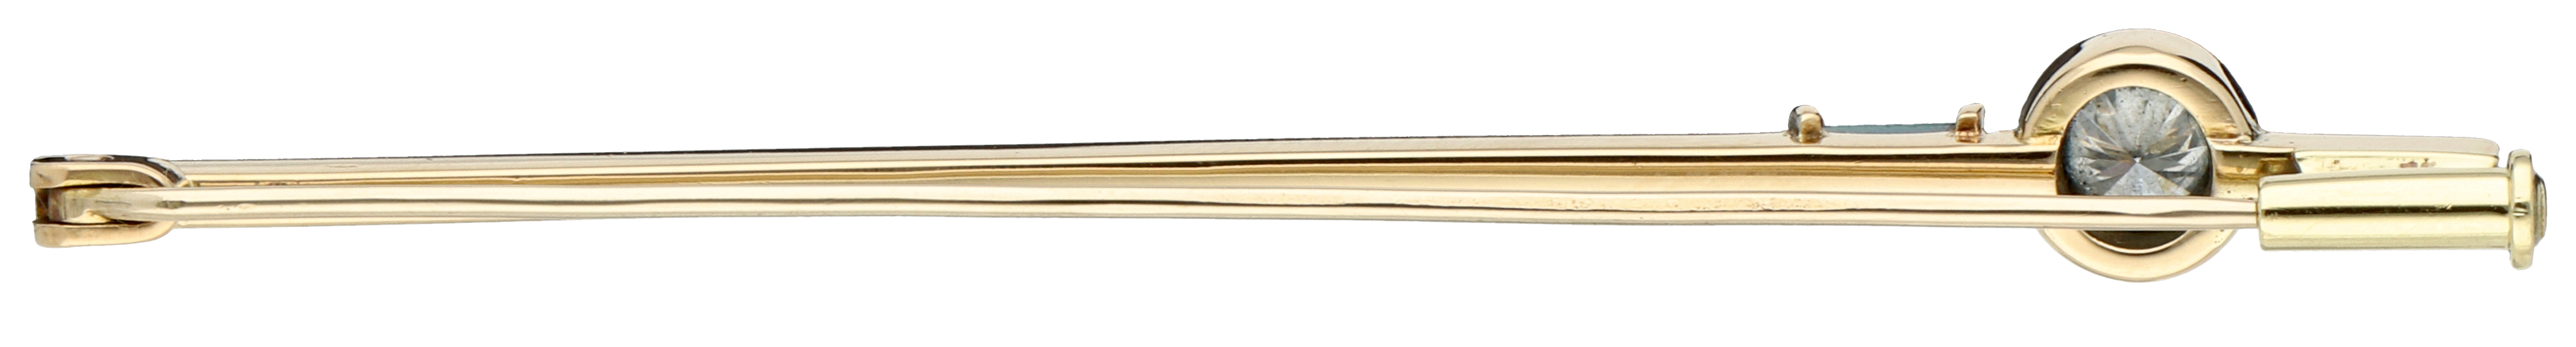 No Reserve - 14K Yellow Gold bar brooch set with approx. 0.29 ct. diamond and synthetic sapphire - Image 3 of 3